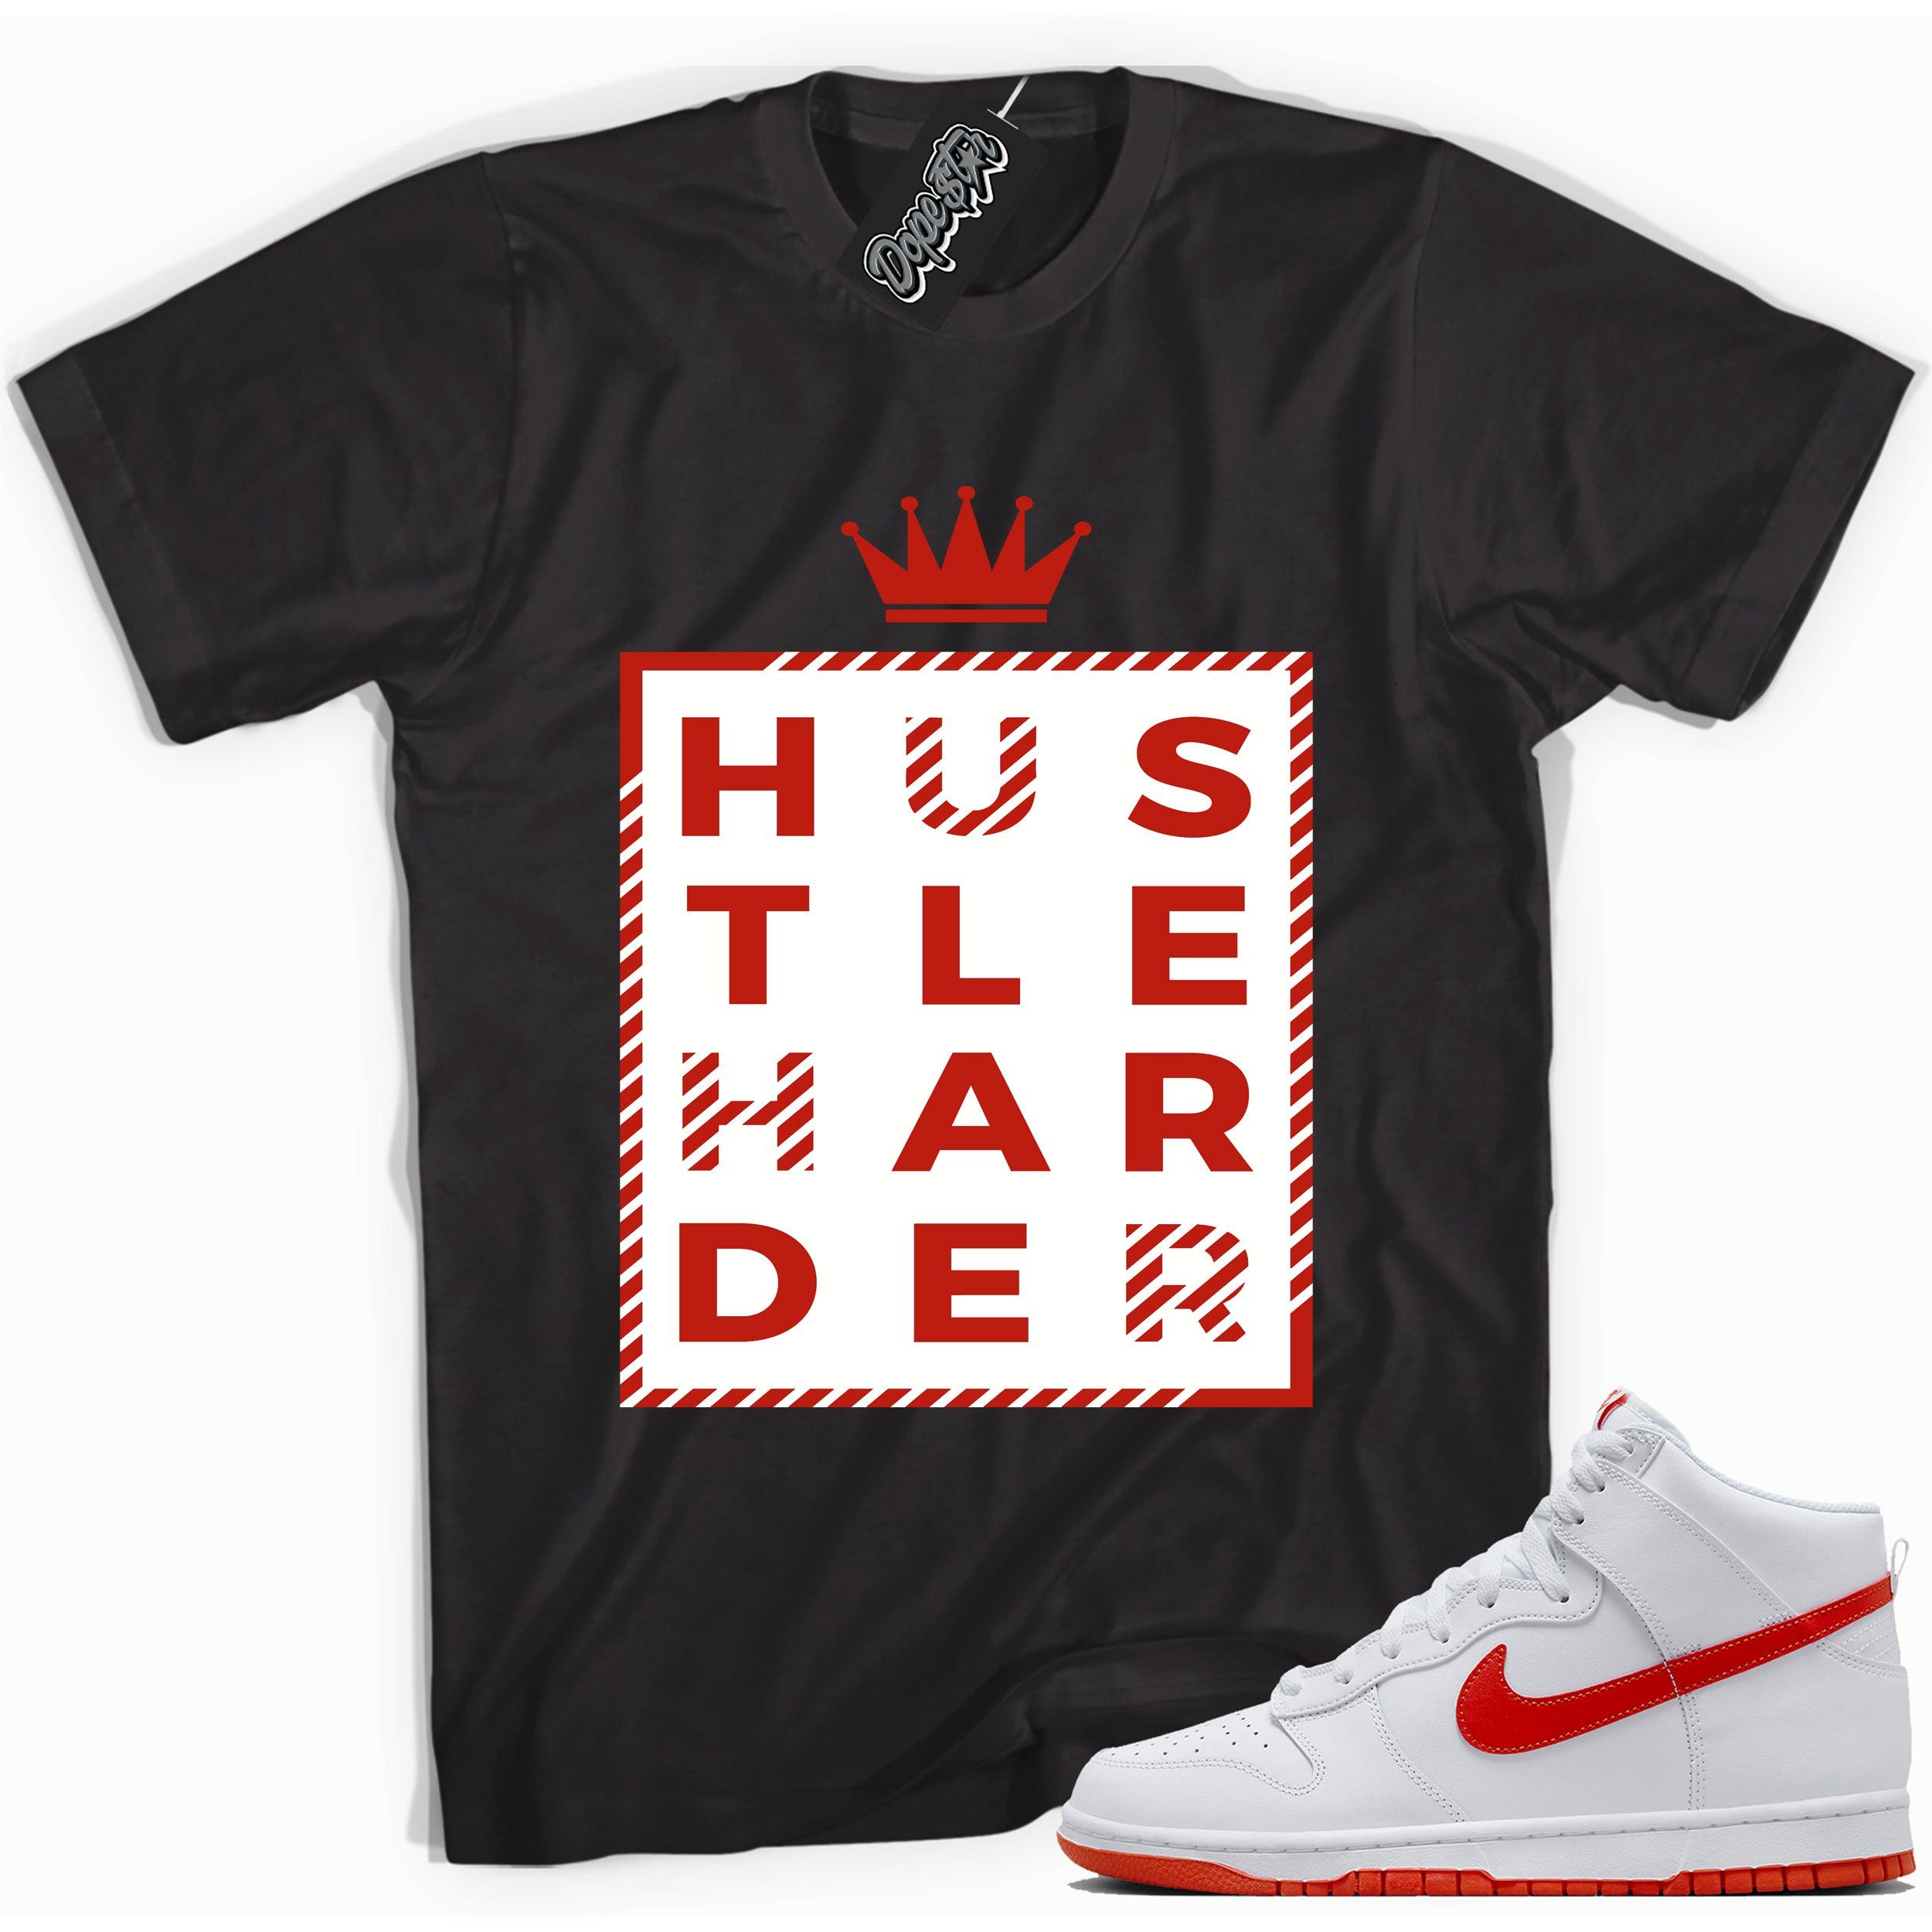 Cool black graphic tee with 'hustle harder' print, that perfectly matches Nike Dunk High White Picante Red sneakers.